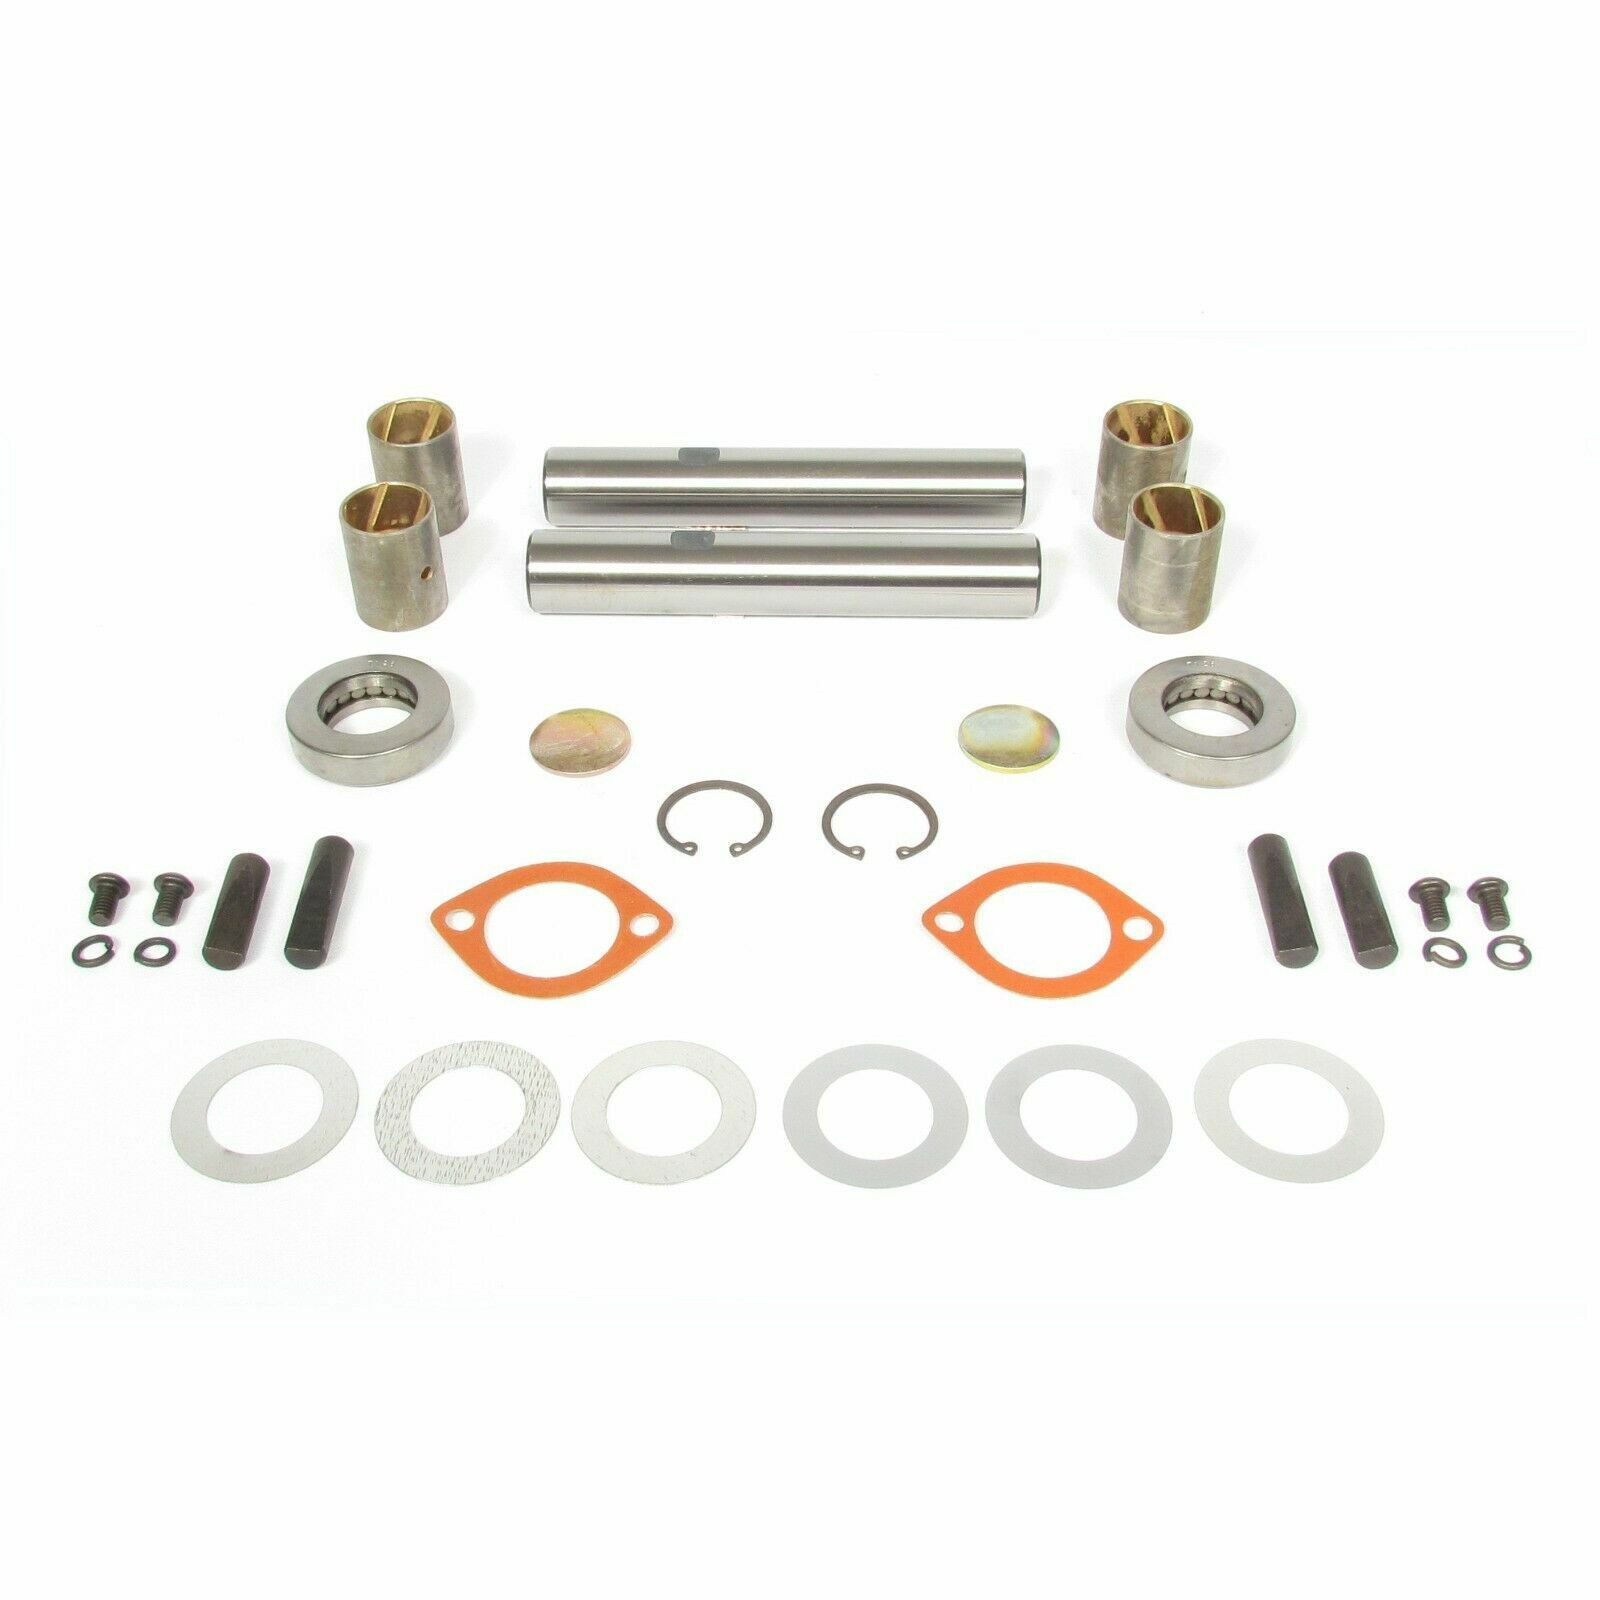 Kb477ar R200016 King Pin Kit 2 (two Keyways) For Dodge C1000 Ford C & Ct Replac.